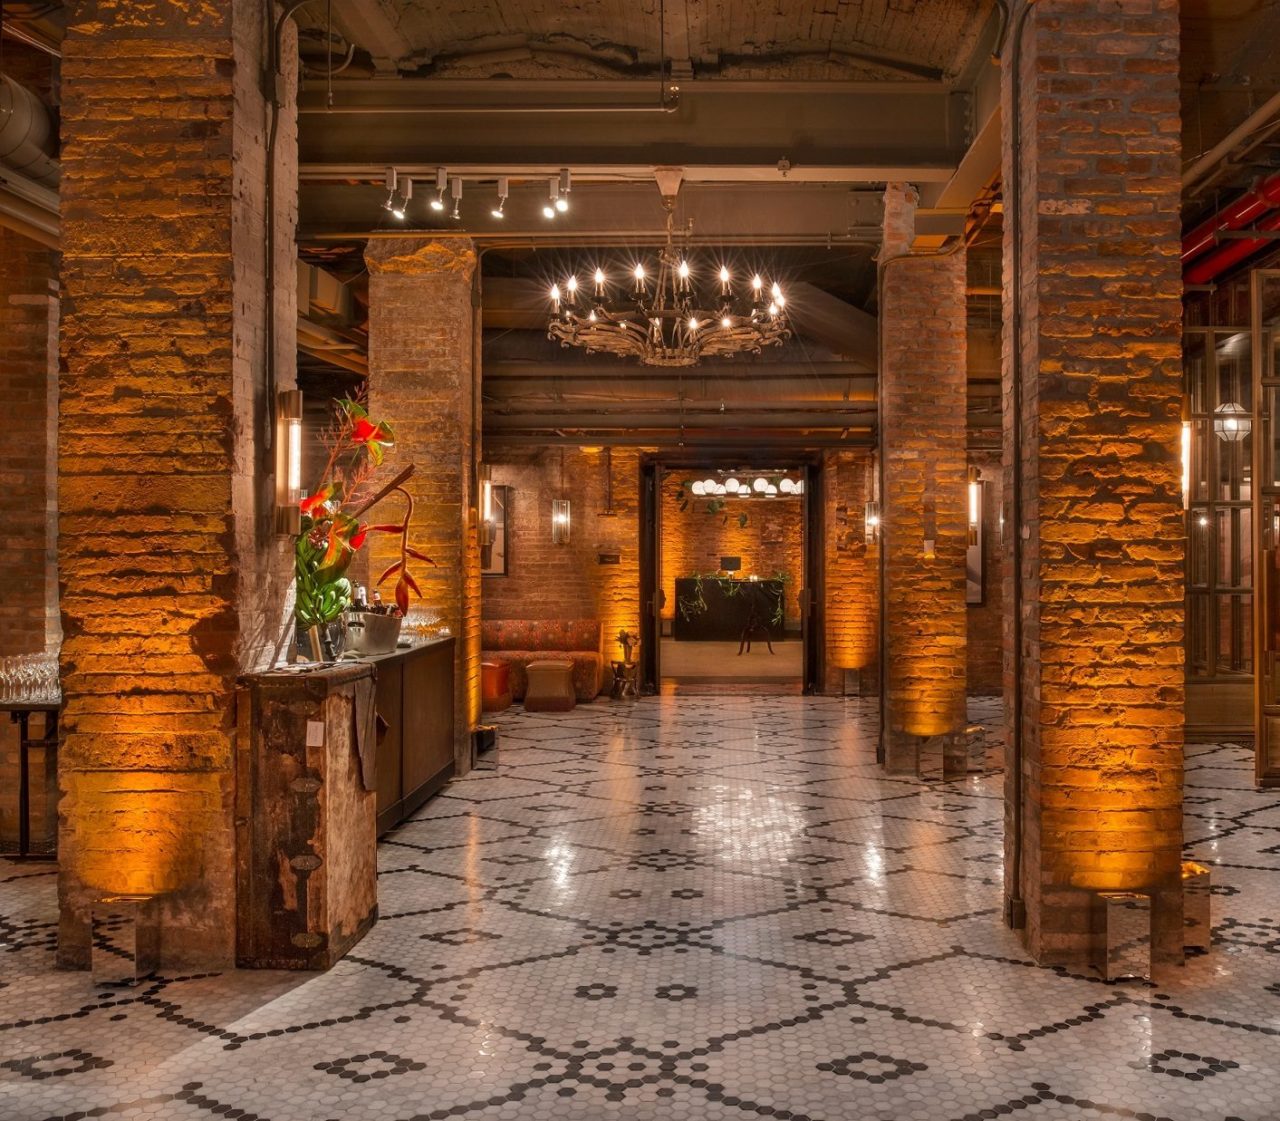 Lobby area just beside the reception counter at the main entrance of The Beekman Hotel